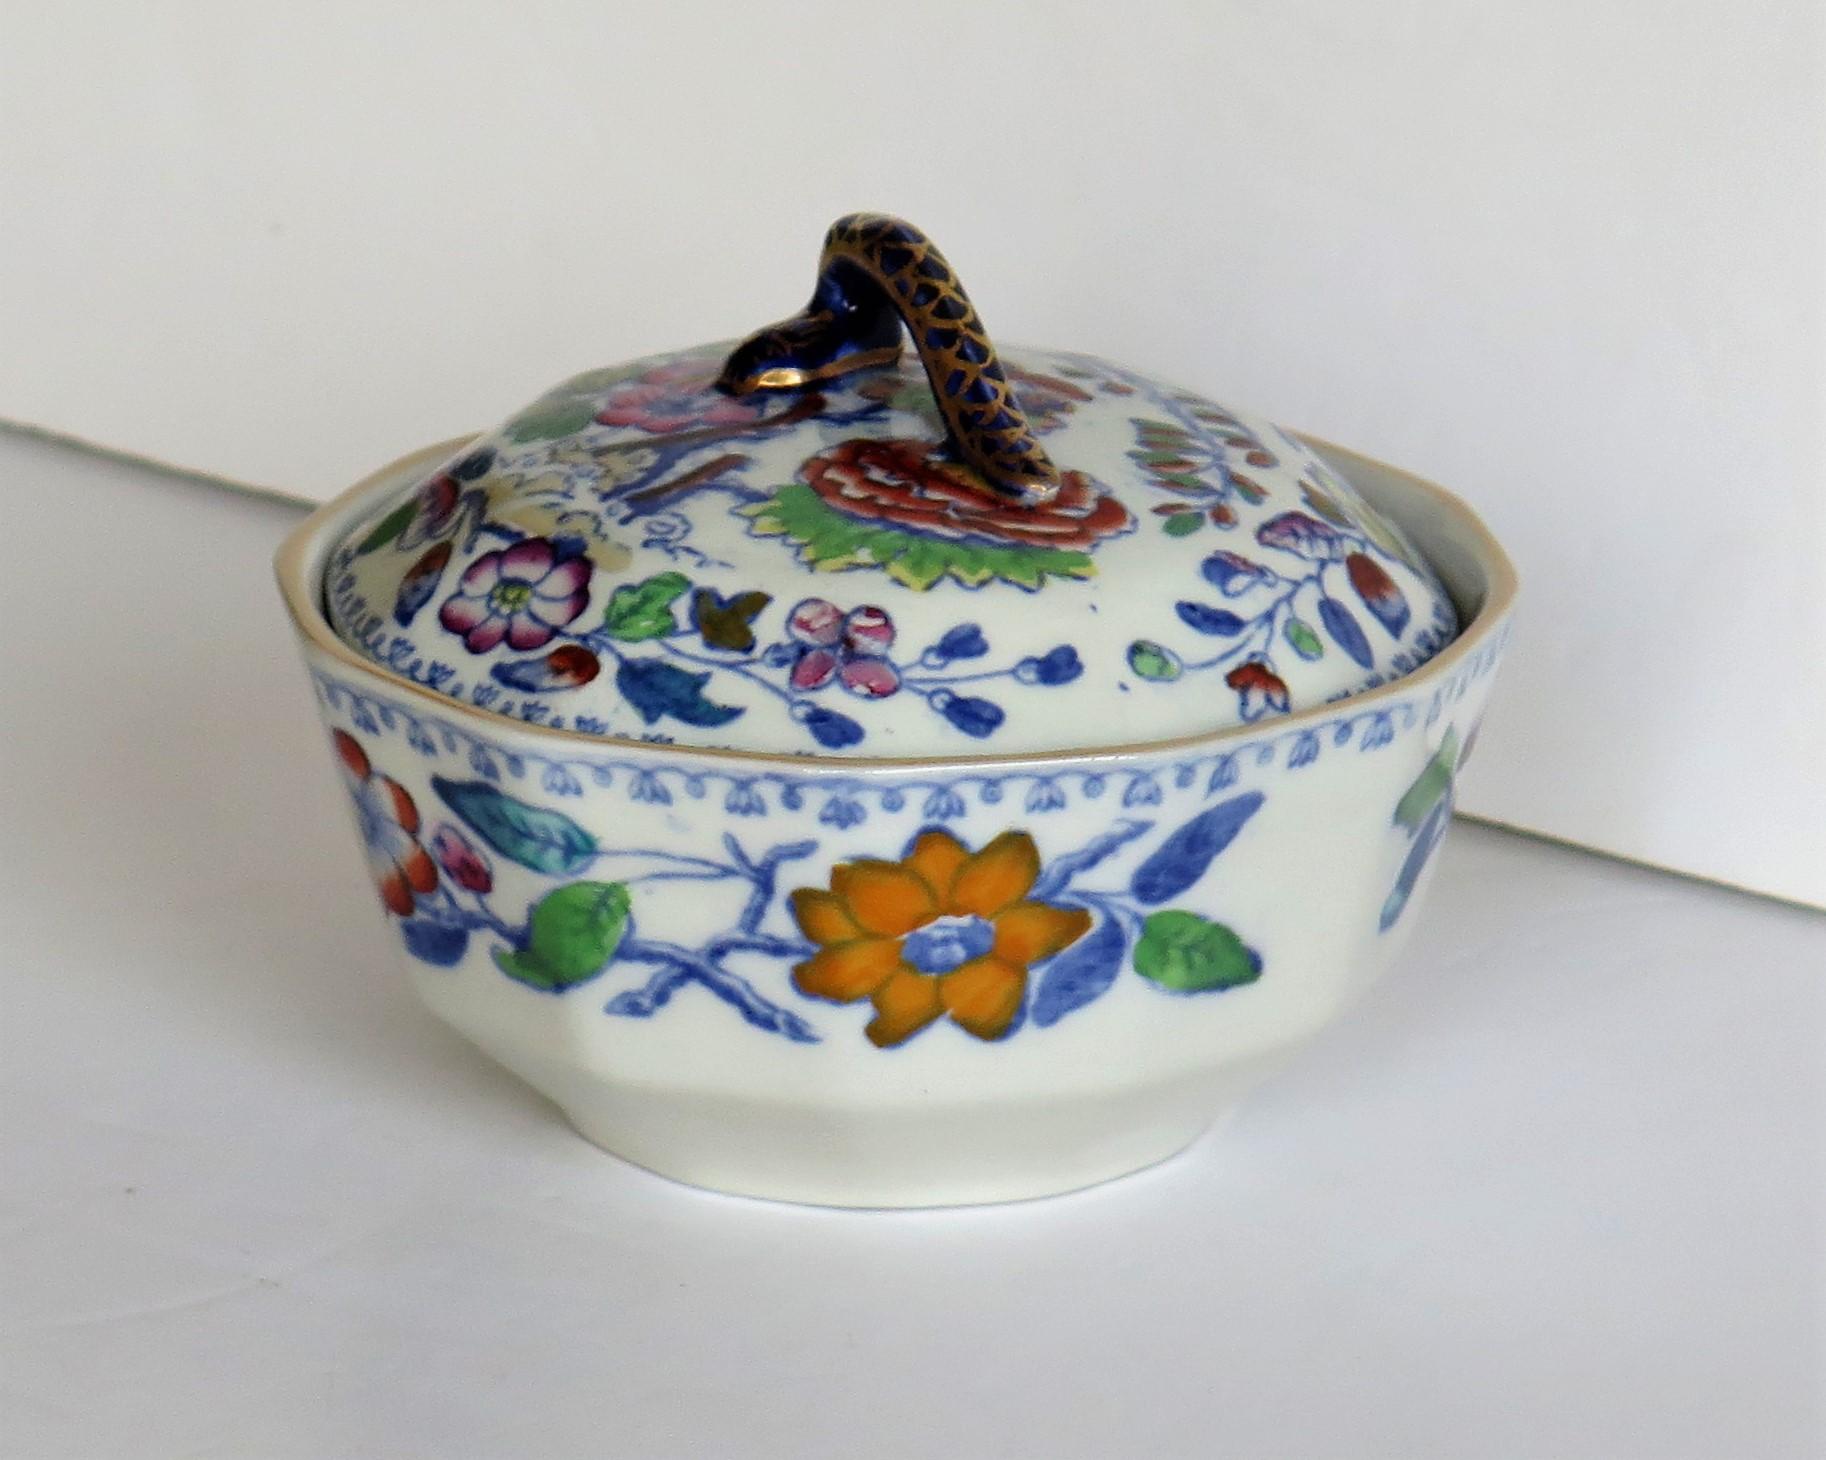 This is a rare ironstone lidded dish or bowl in a rare shape, hand enameled in the Flying Bird pattern, made by Mason's Ironstone of Lane Delph, Staffordshire, England, during the late 19th century, circa 1890.

This Dish is well potted with 12